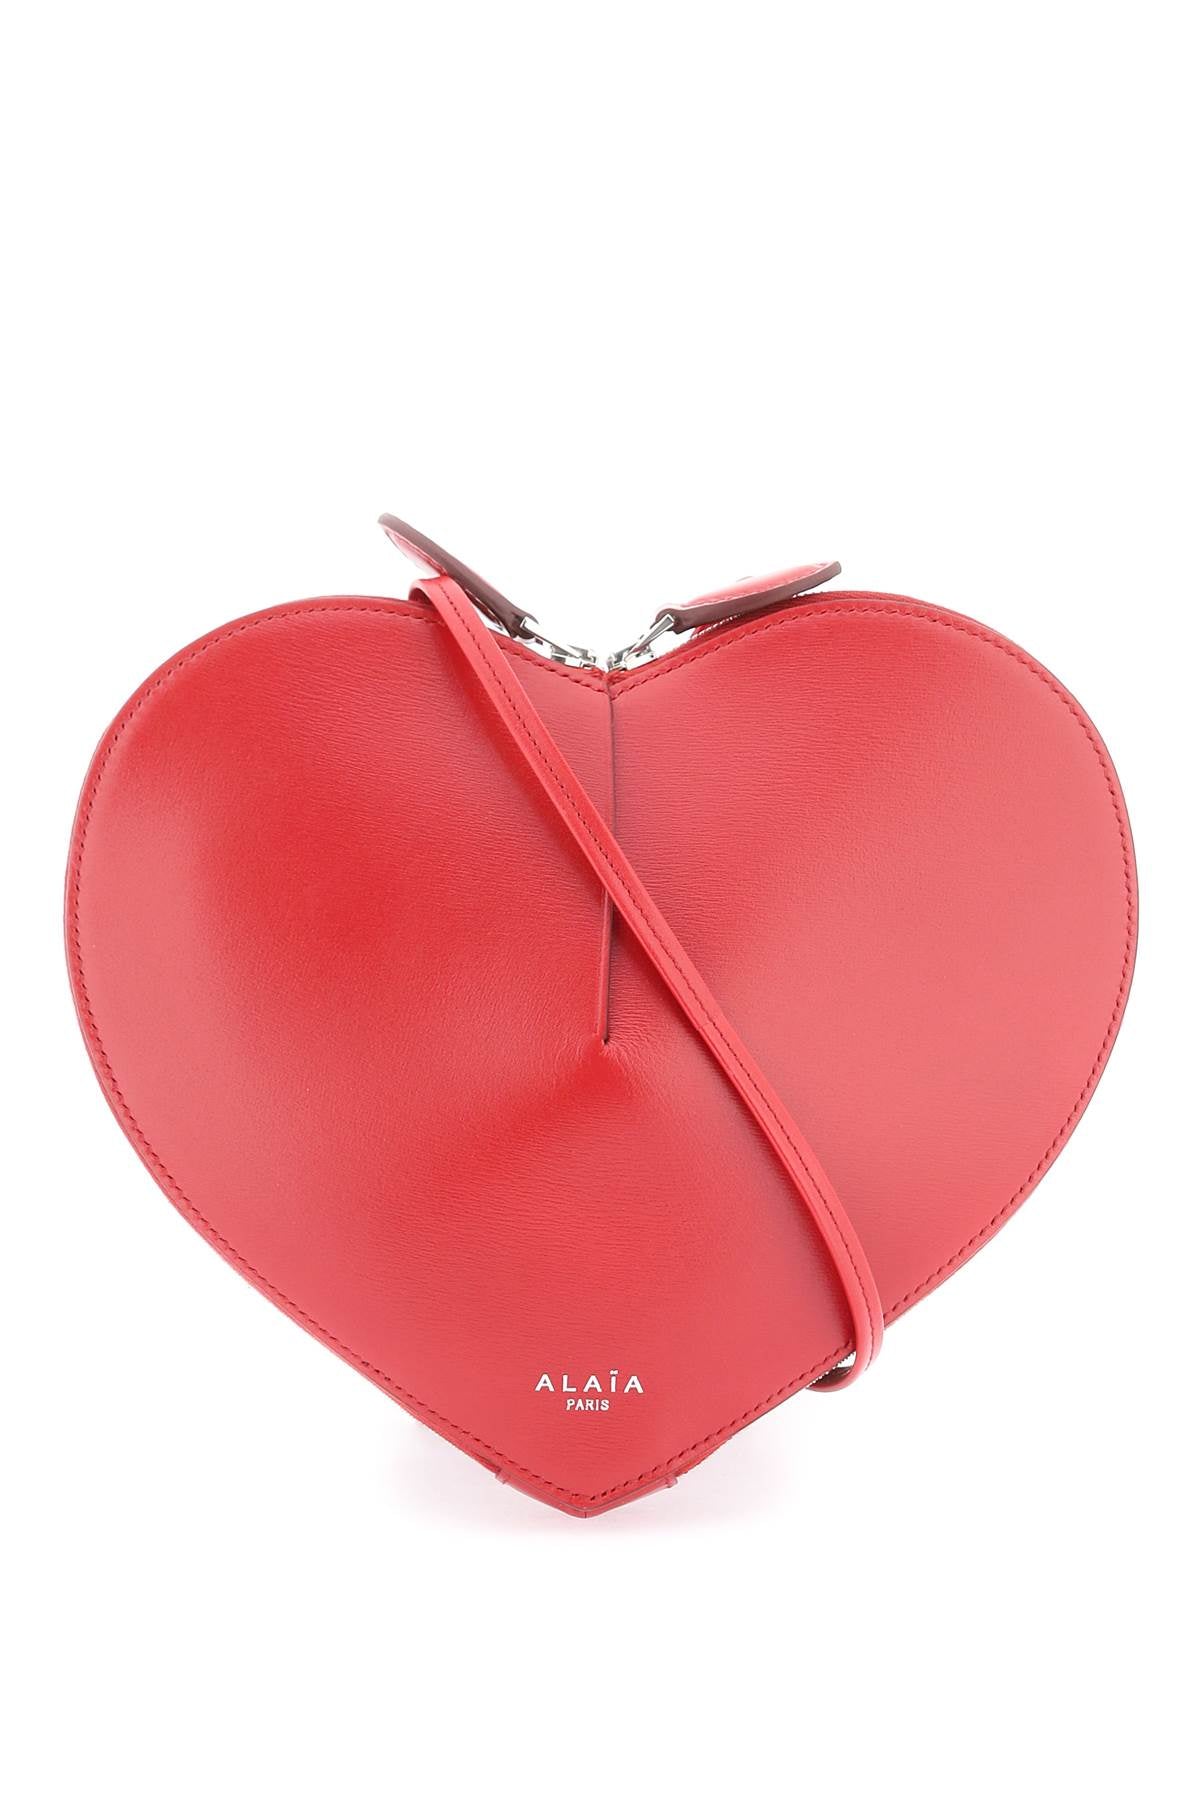 ALAIA Coeur Leather Handbag for Women in Red